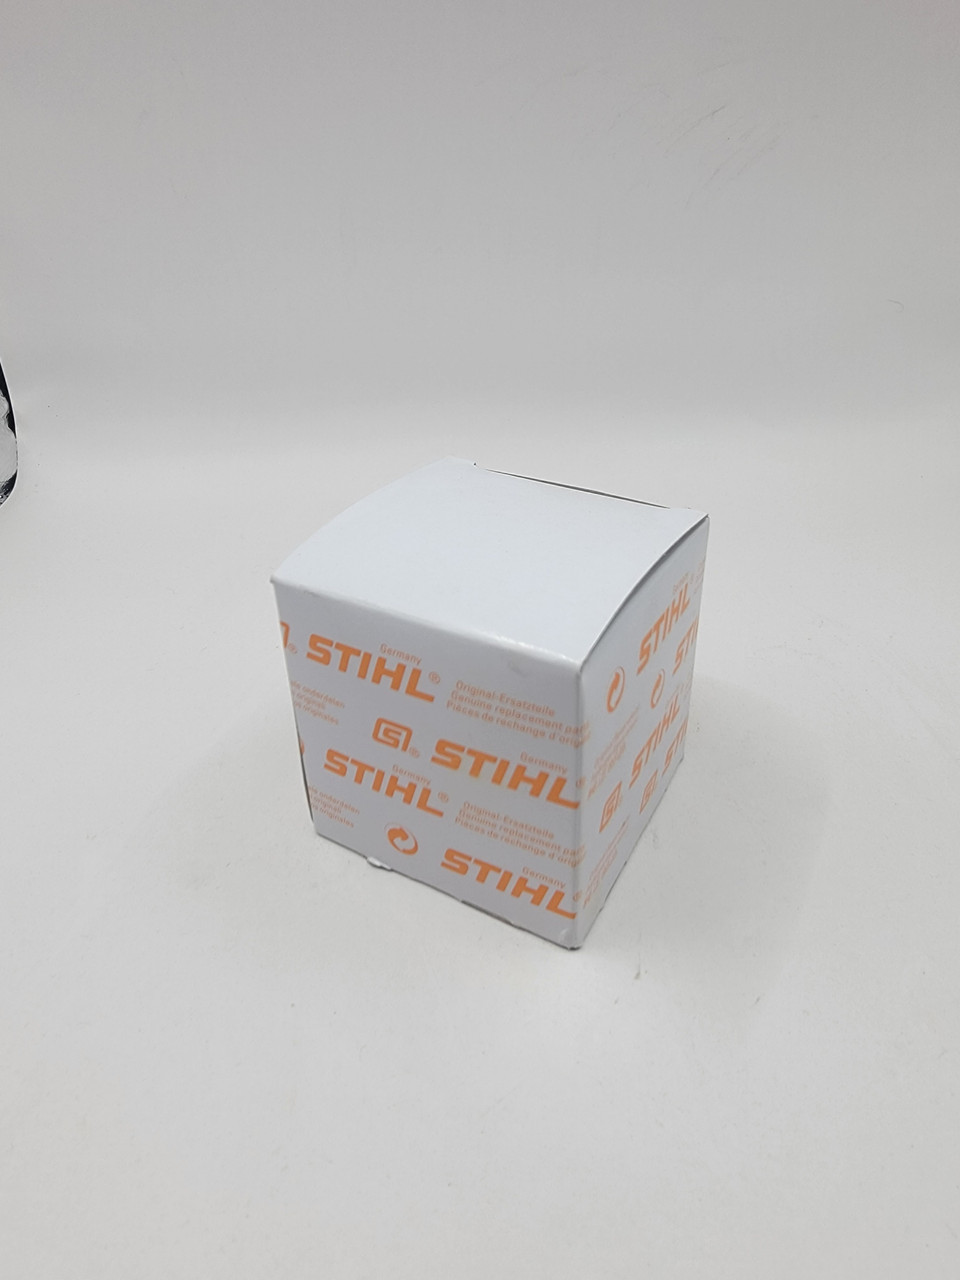 Stihl 4601 731 7902 STRUT (MM 55) one package